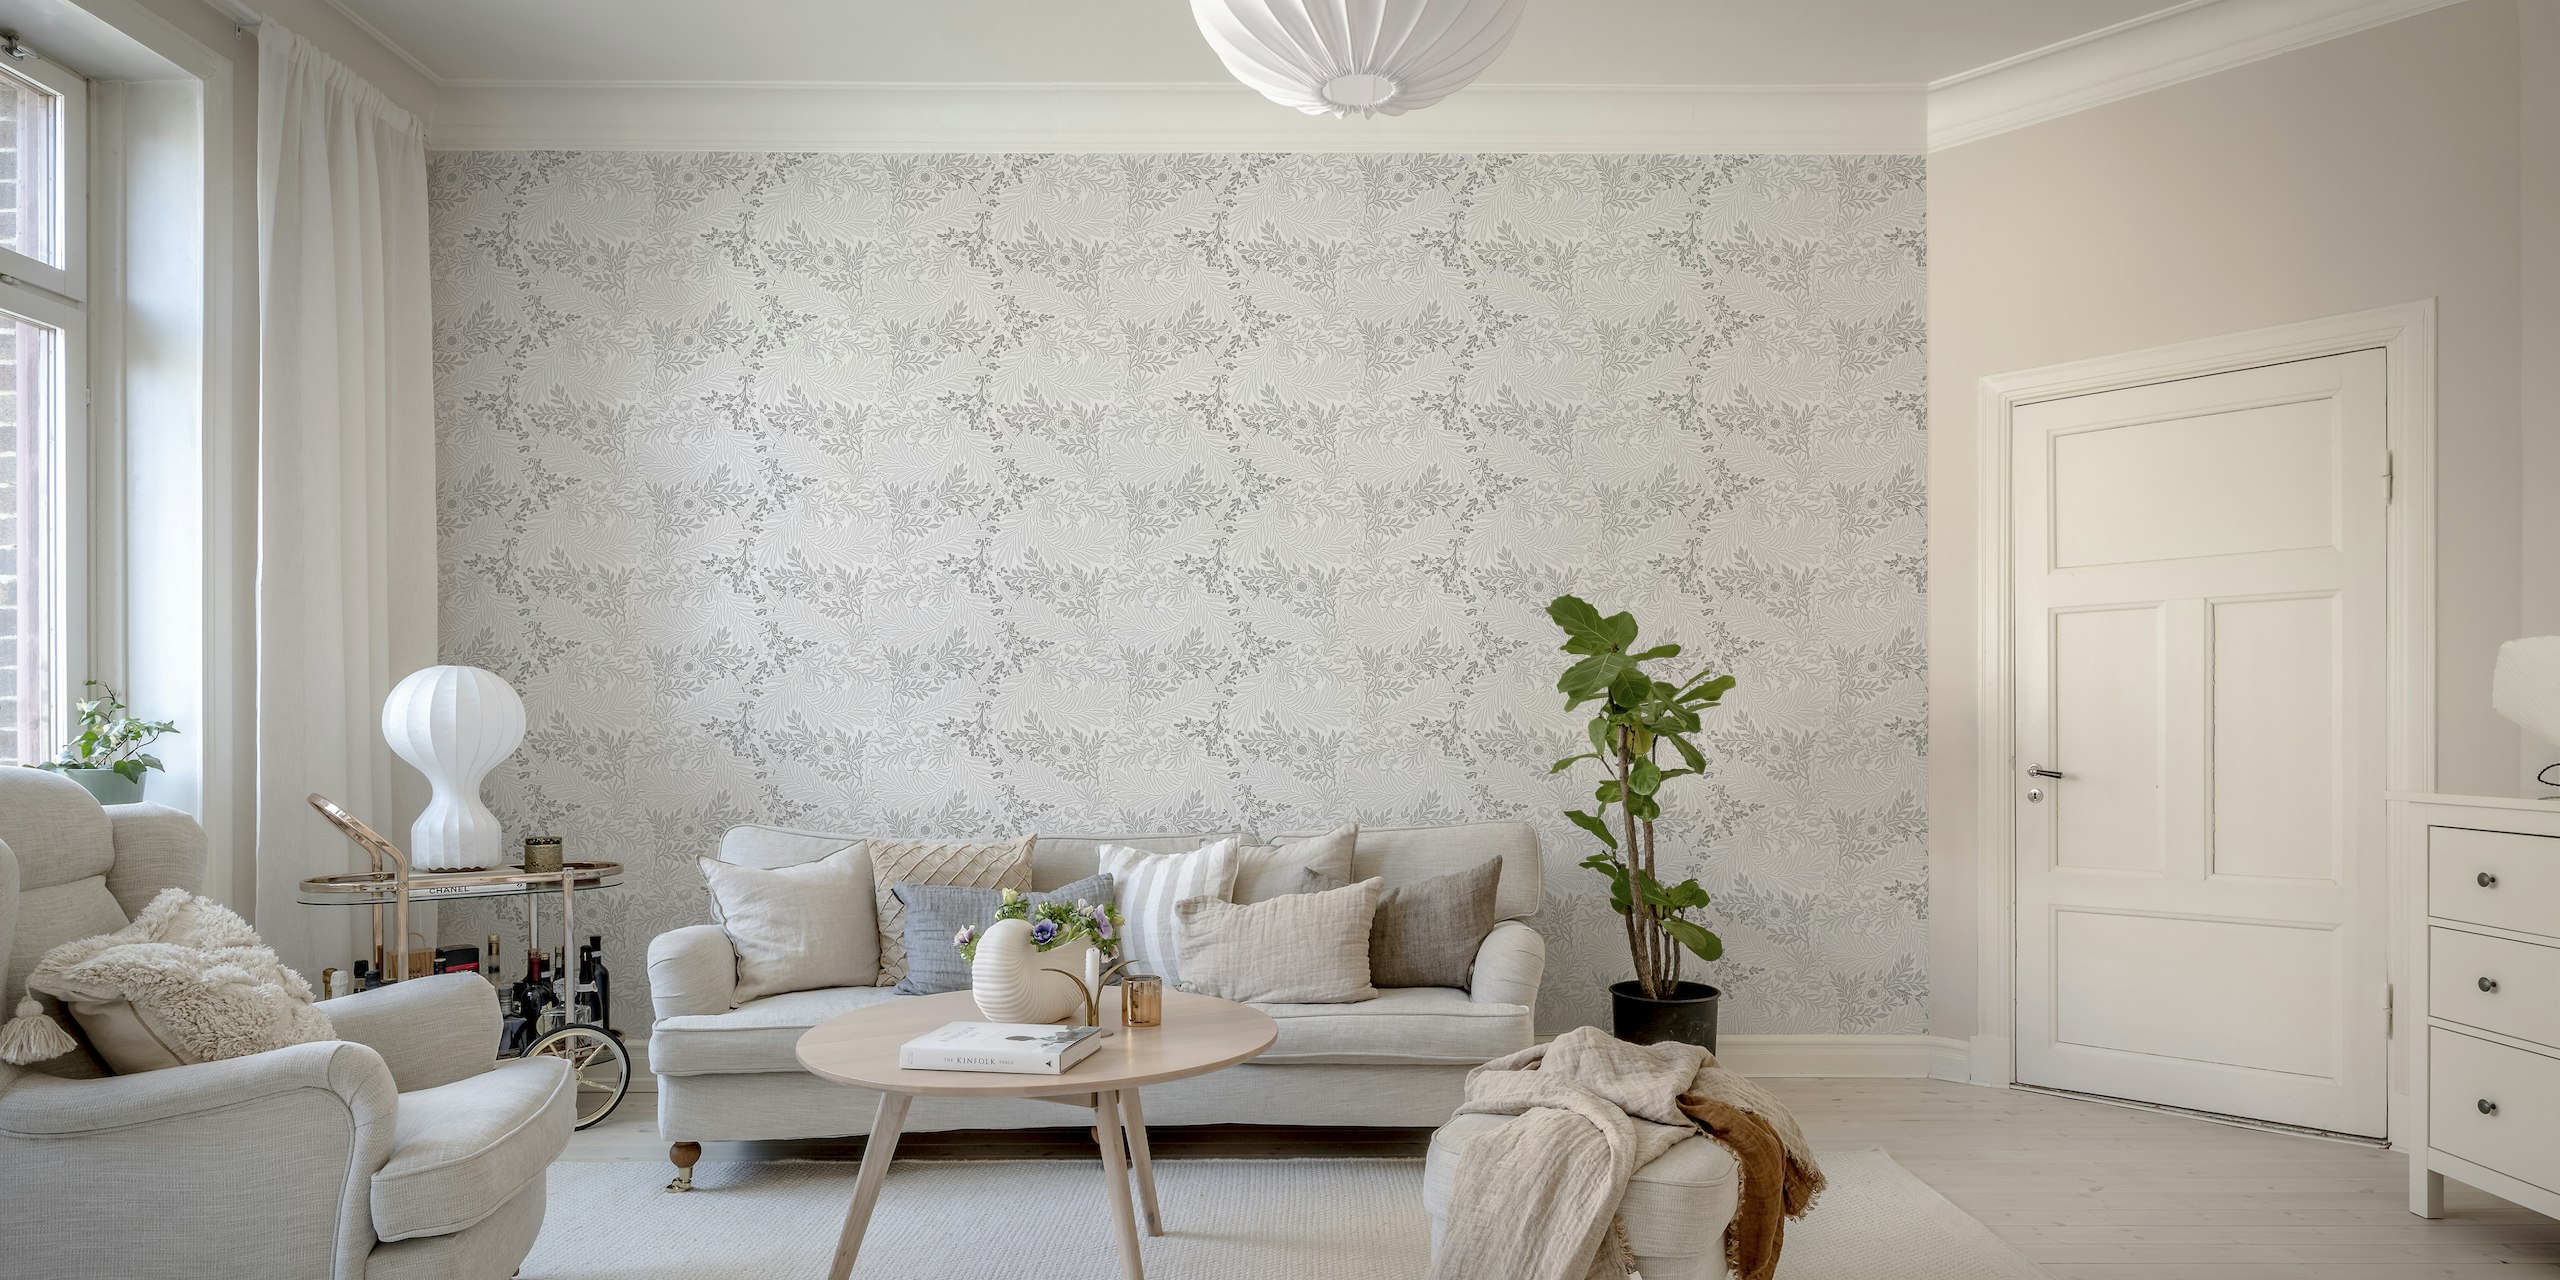 Monochromatic vintage etched floral pattern wall mural